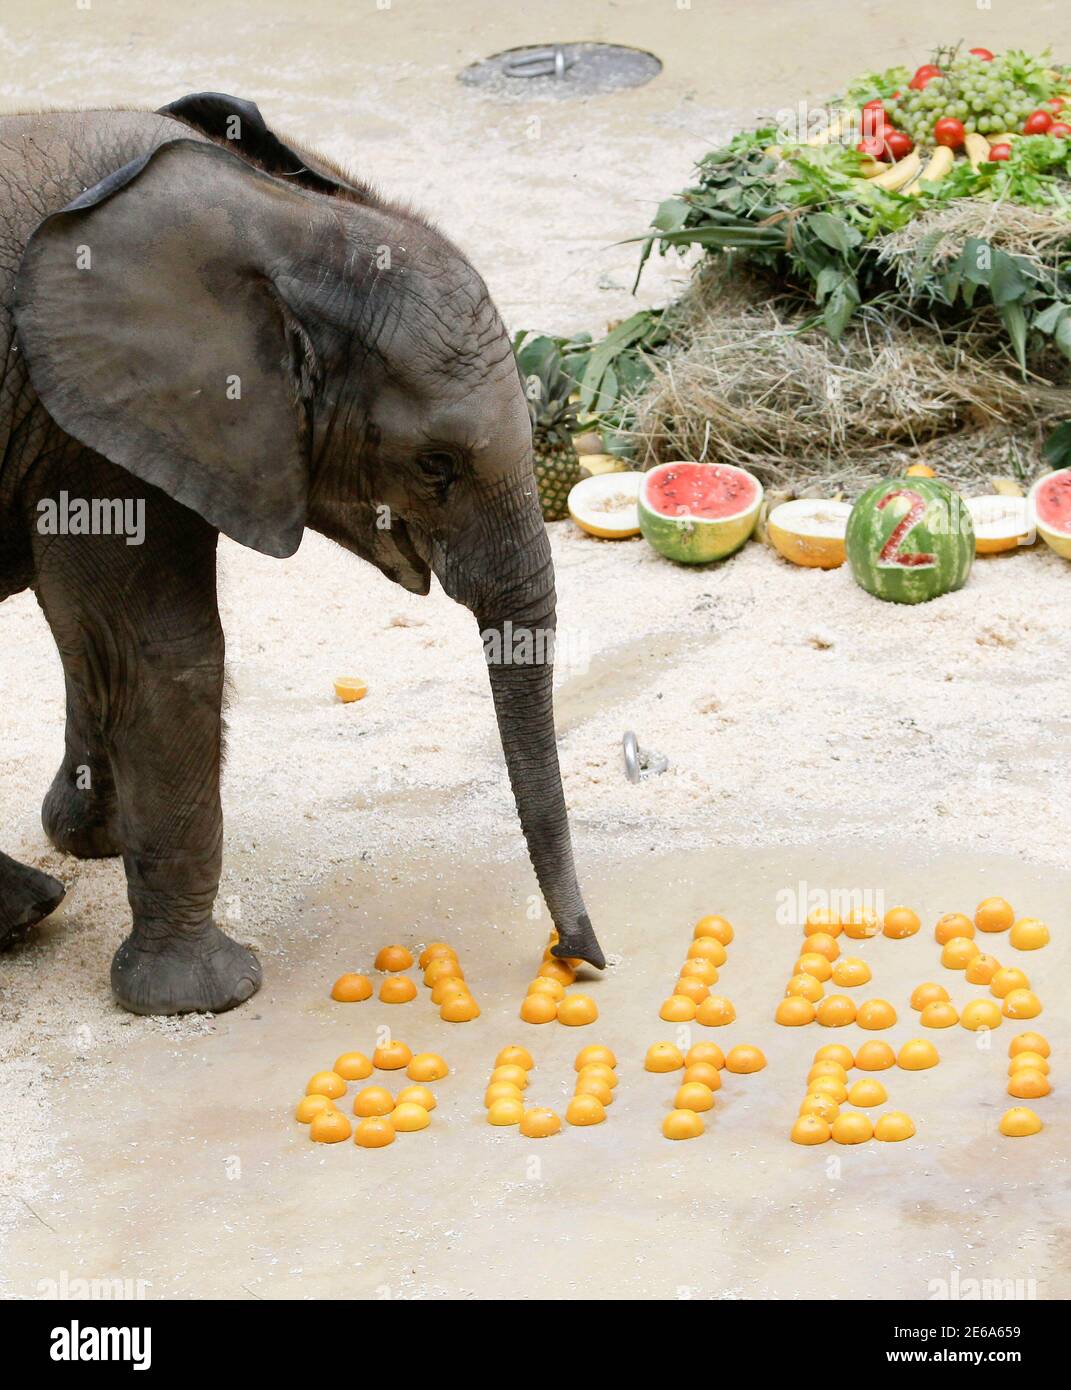 African elephant calf Tuluba looks at vegetables formed as a cake on its second birthday at its enclosure in Schoenbrunn Zoo, Vienna August 6, 2012. 'Alles Gute' reads 'All the Best'. REUTERS/Leonhard Foeger  (AUSTRIA - Tags: ANIMALS) Stock Photo